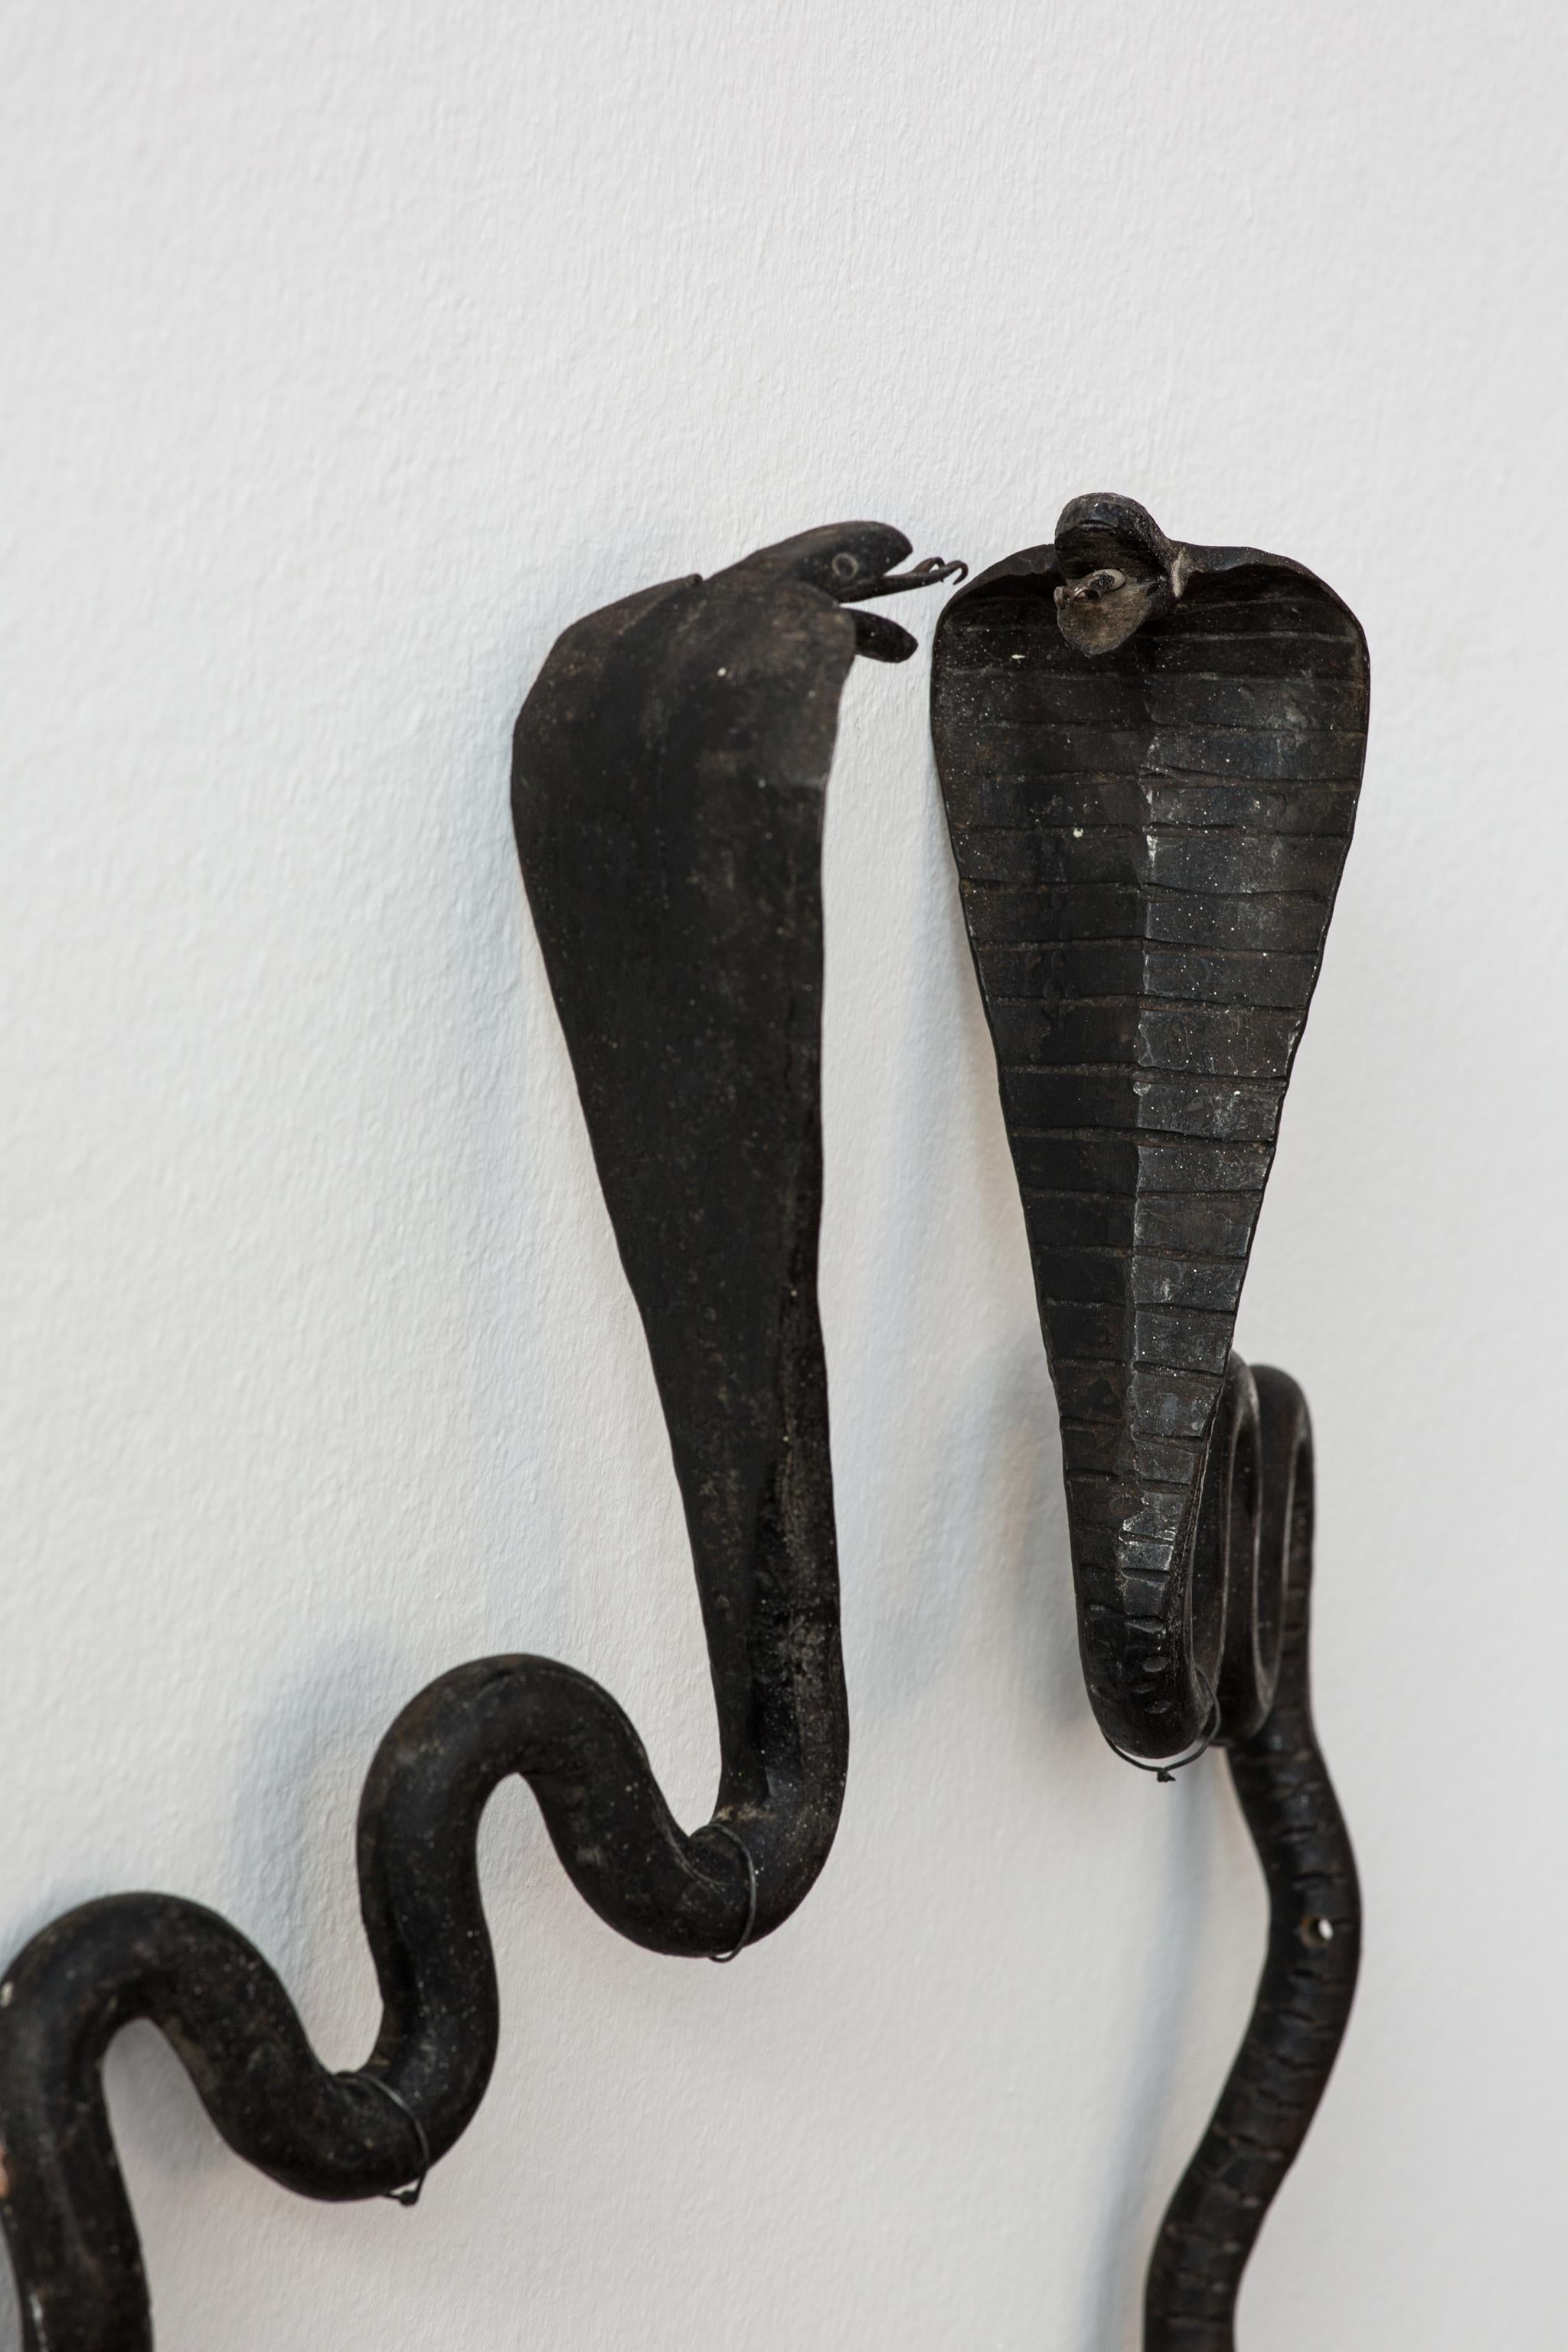 Very unusual and unique Pair of Art Deco iron Wall lights in the shape of snakes from France. The snakes are made from Black Wrought Iron in France at the beginning of the 20th Century and were more likely used as wall appliques in former times.